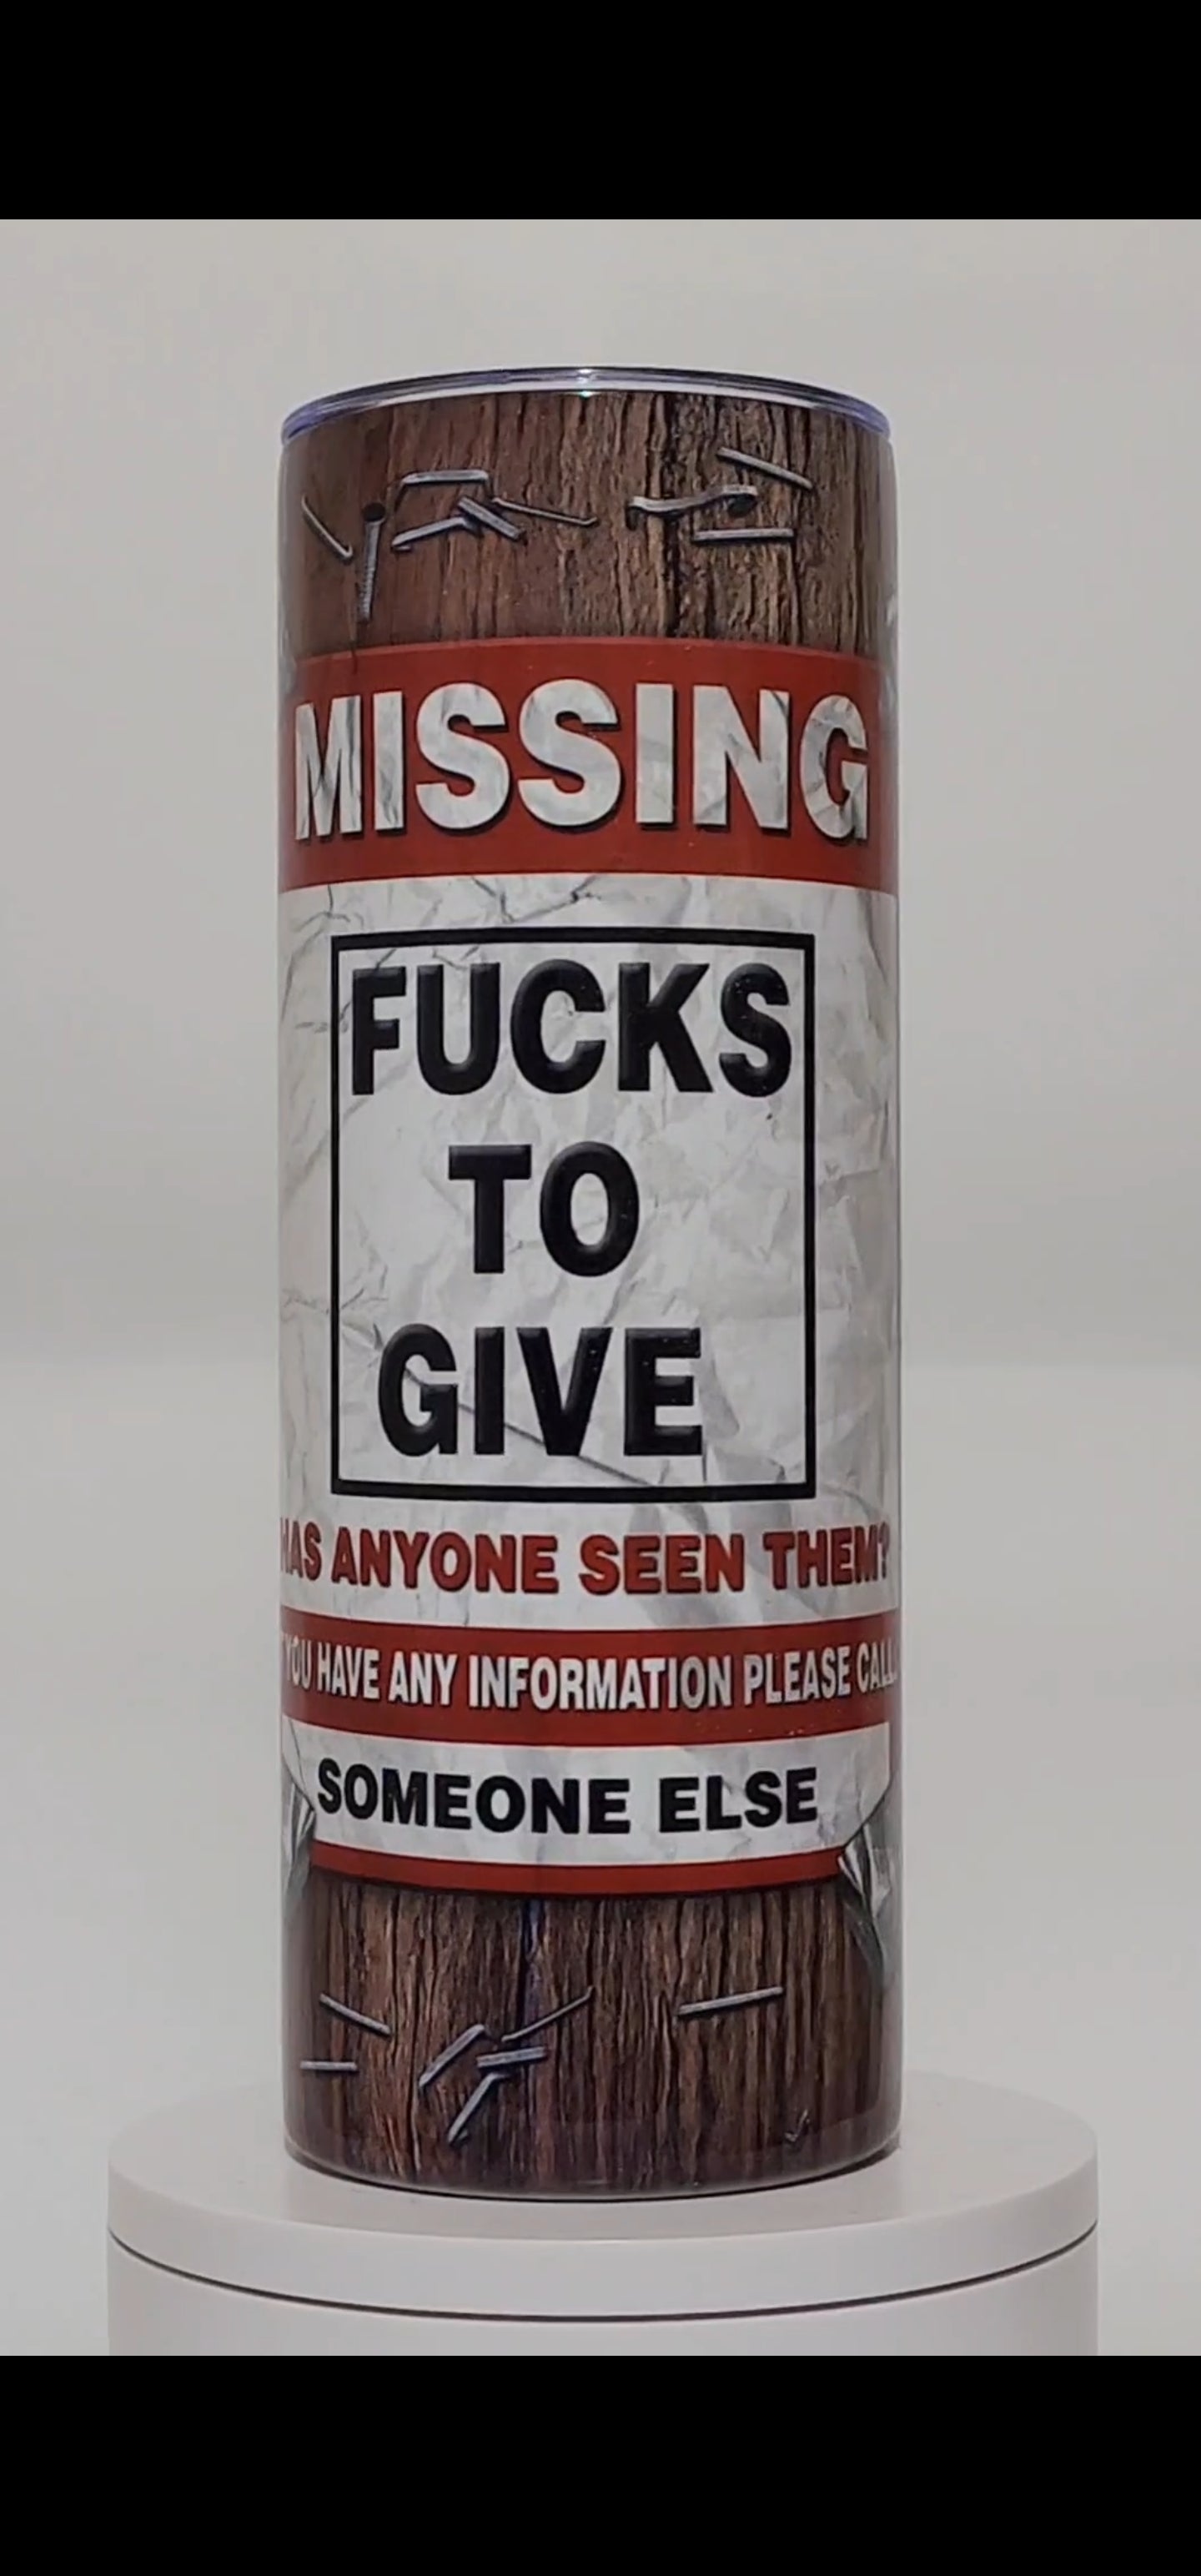 Missing Fucks to Give